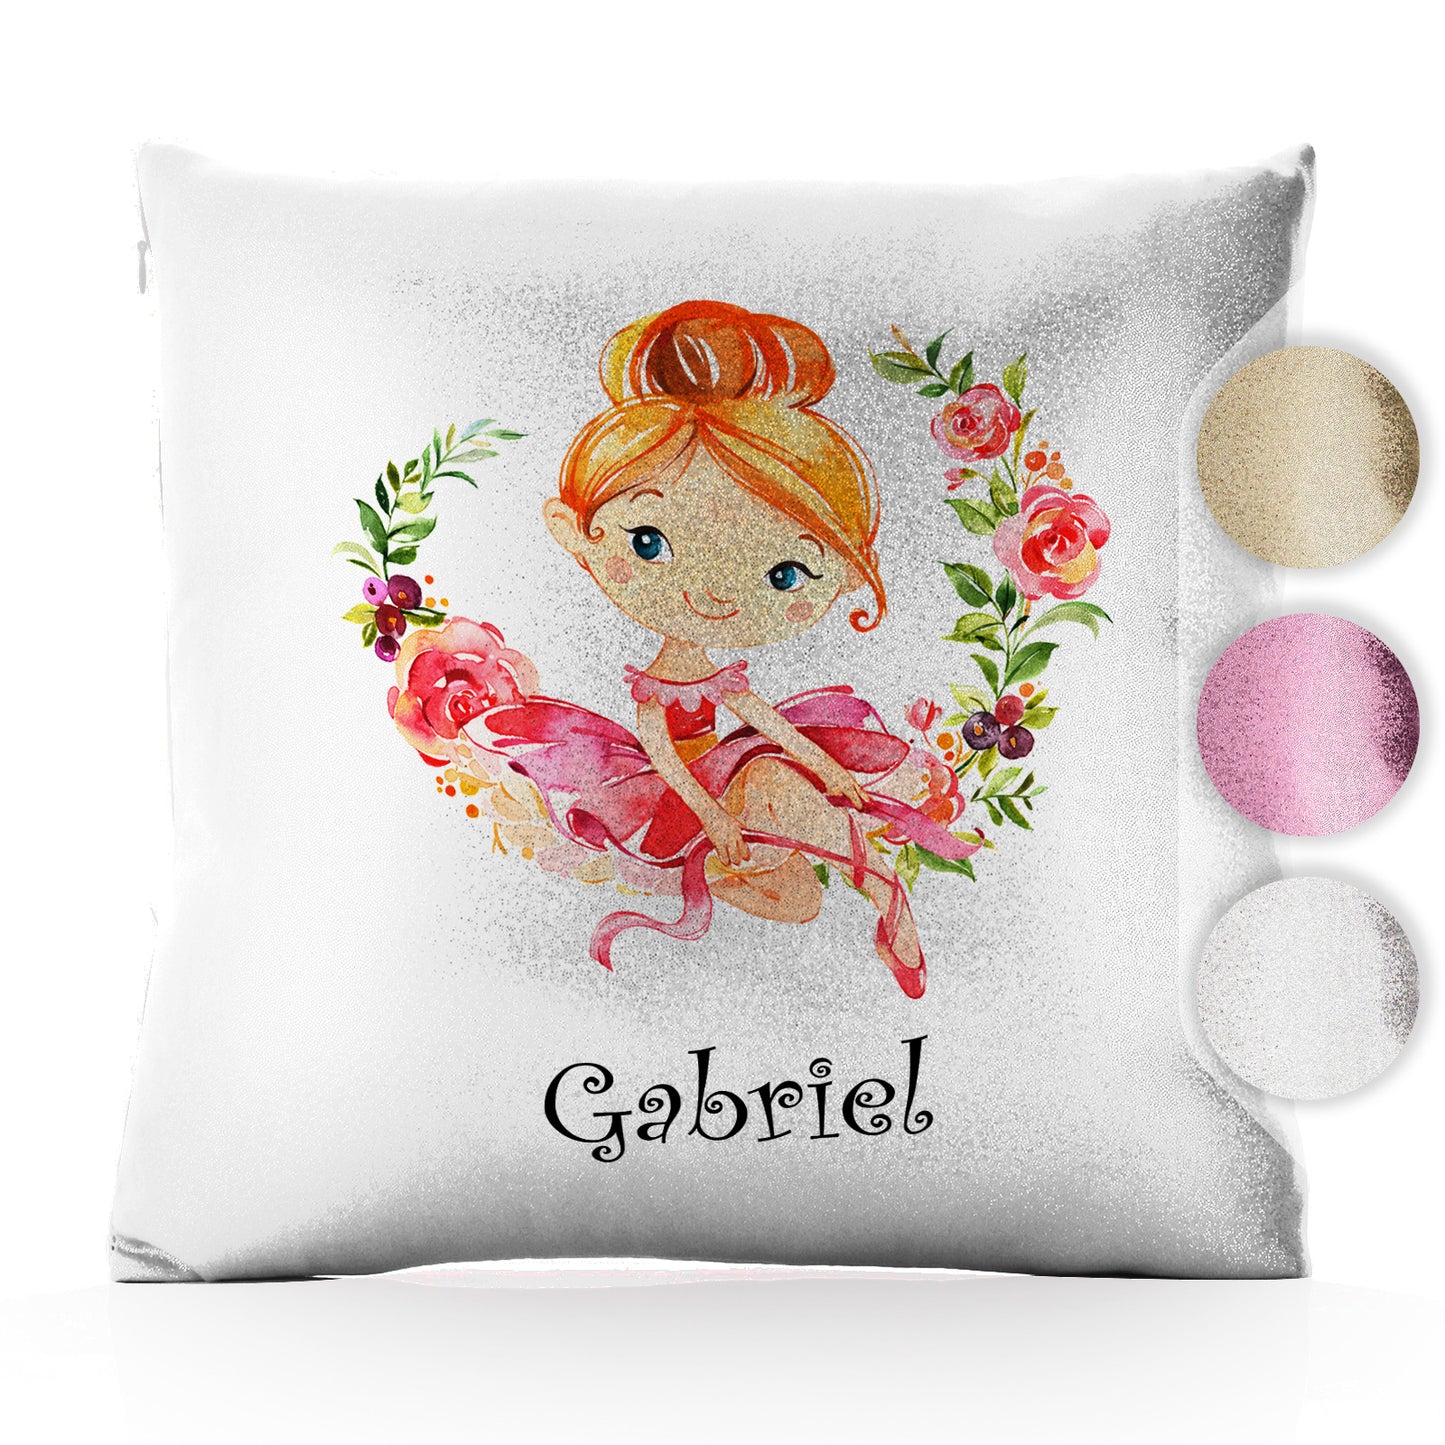 Personalised Glitter Cushion with Cute Text and Flower Wreath Red Hair Ballerina